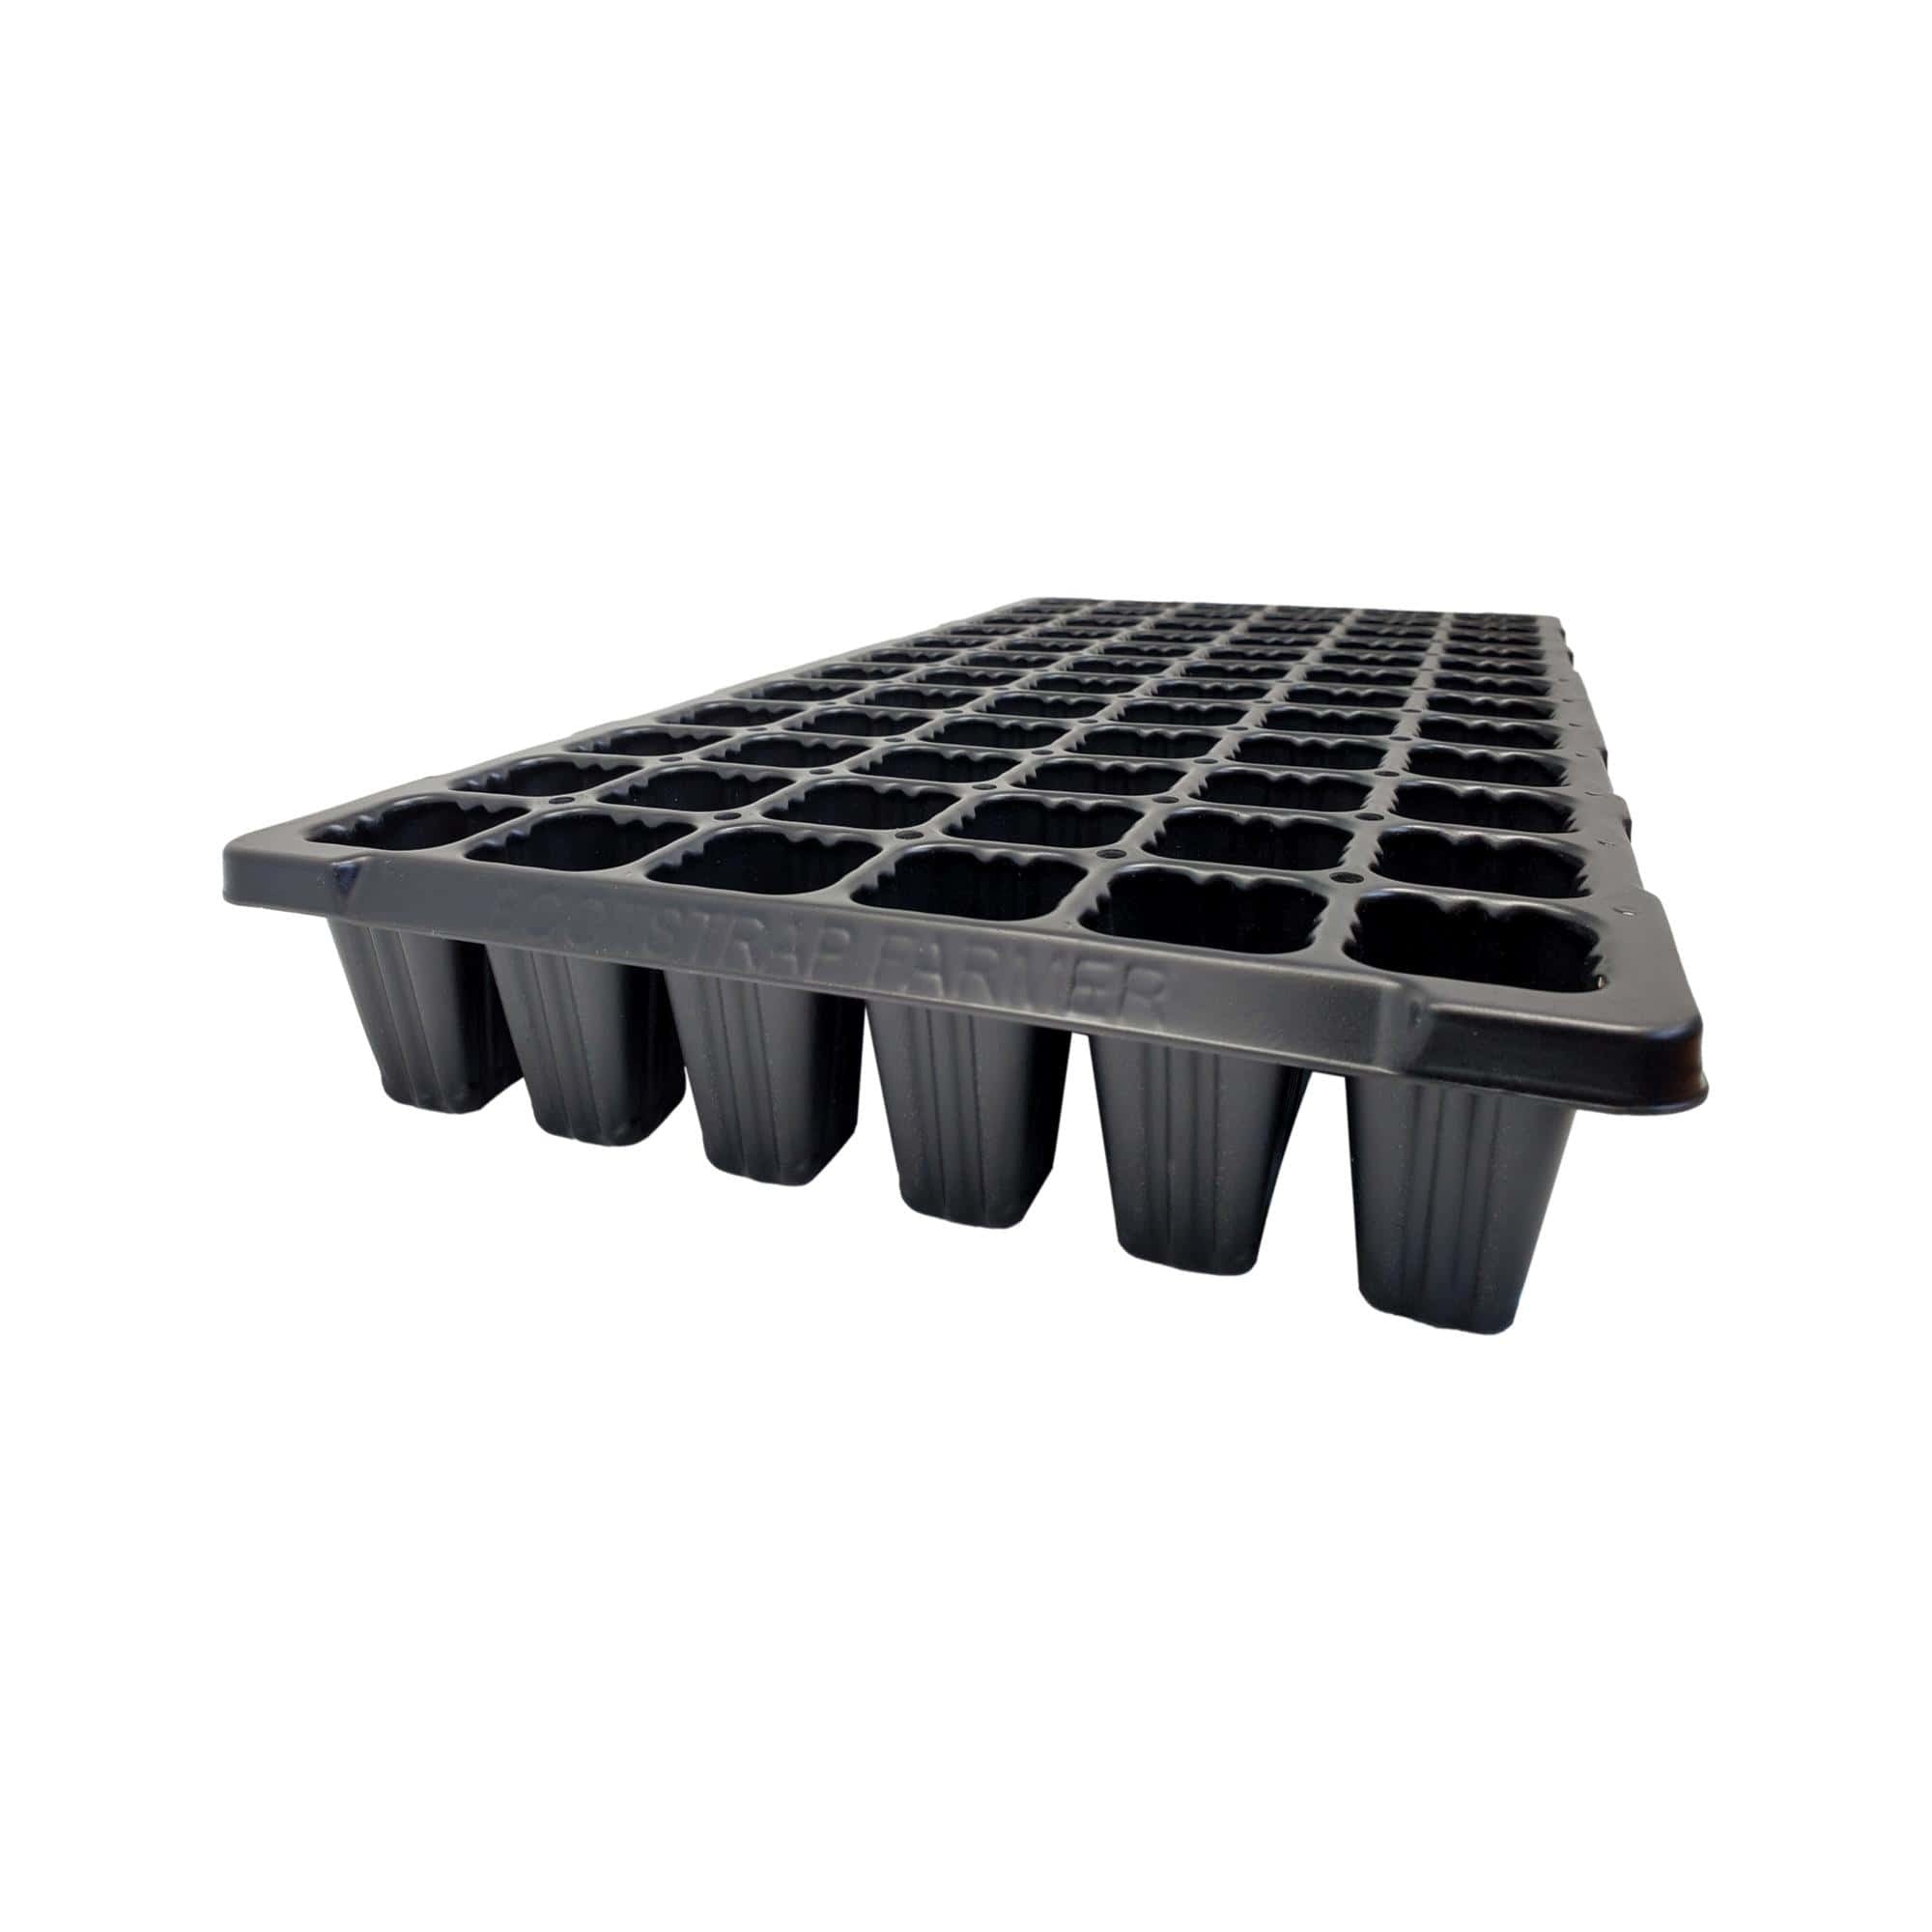 Plug Trays - 72 Cell Seed Trays - Bootstrap Farmer